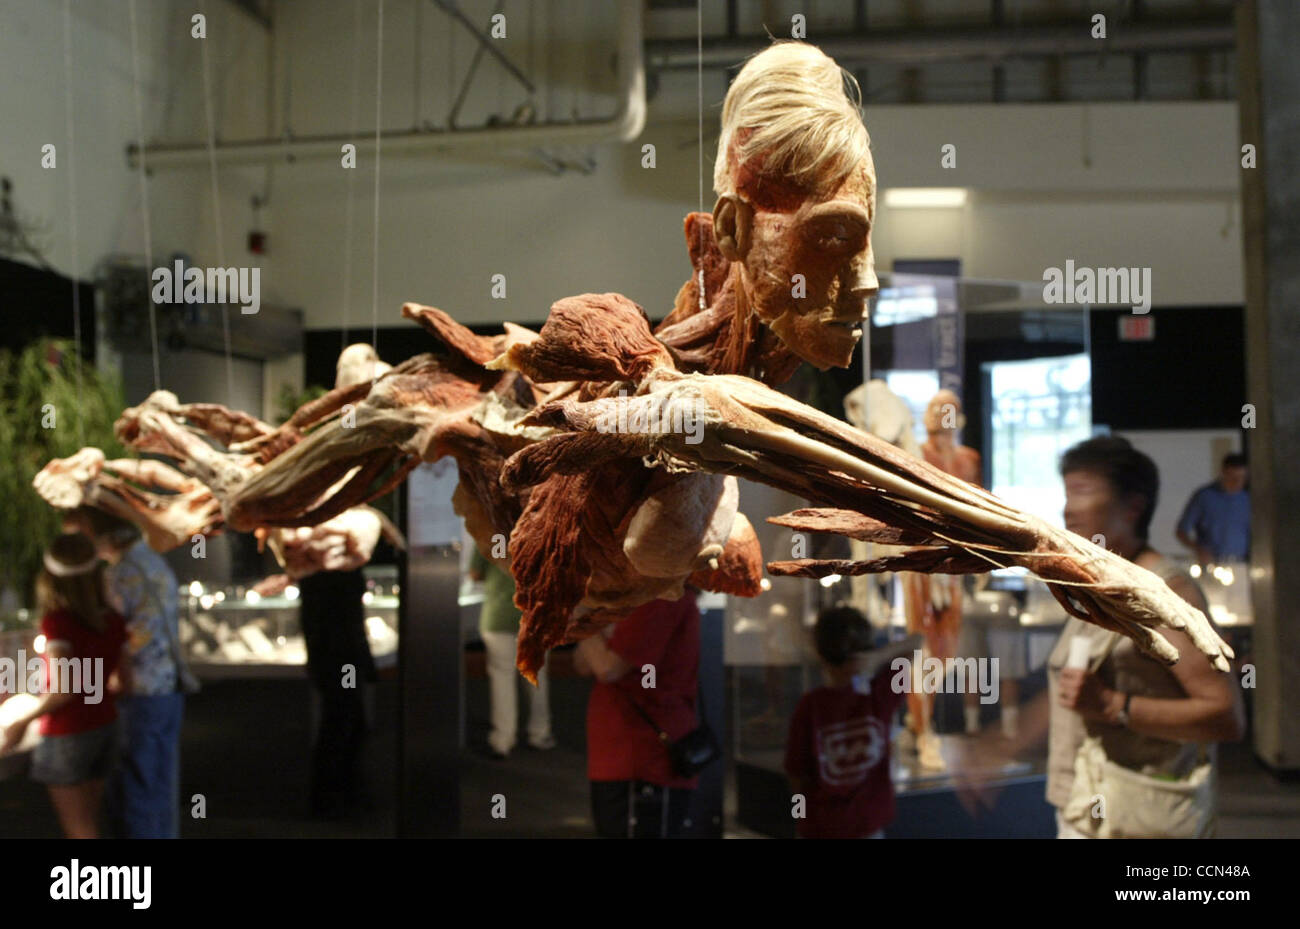 Aug 10, 2004; Los Angeles, CA, USA; Visitors view the BODY WORLDS exhibit displayed at the California Science Center, the largest traveling exhibition ever covering 20,000 square feet. Until recently the privilege of viewing corpses and the human bodys interior has been confined to medical students  Stock Photo